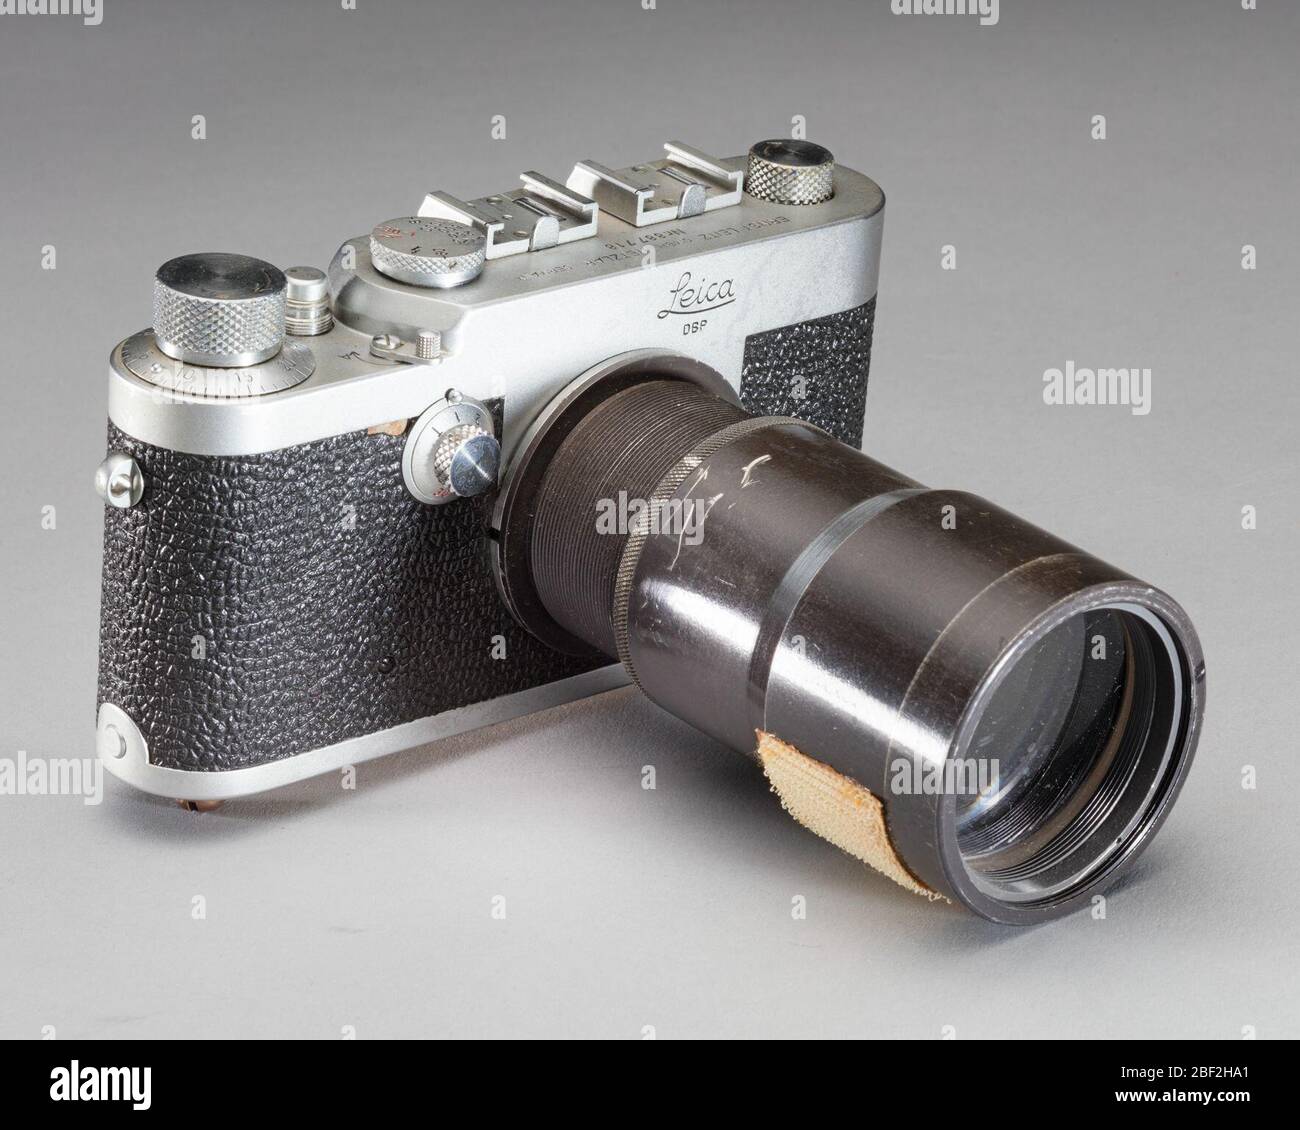 Camera Leica Spectrographic 35mm Glenn Friendship 7. With this camera, a Leica 1g model, astronaut John H. Glenn, Jr.,carried out the first human-operated, astronomical experiment in space during his pioneering mission on February 20, 1962. Stock Photo